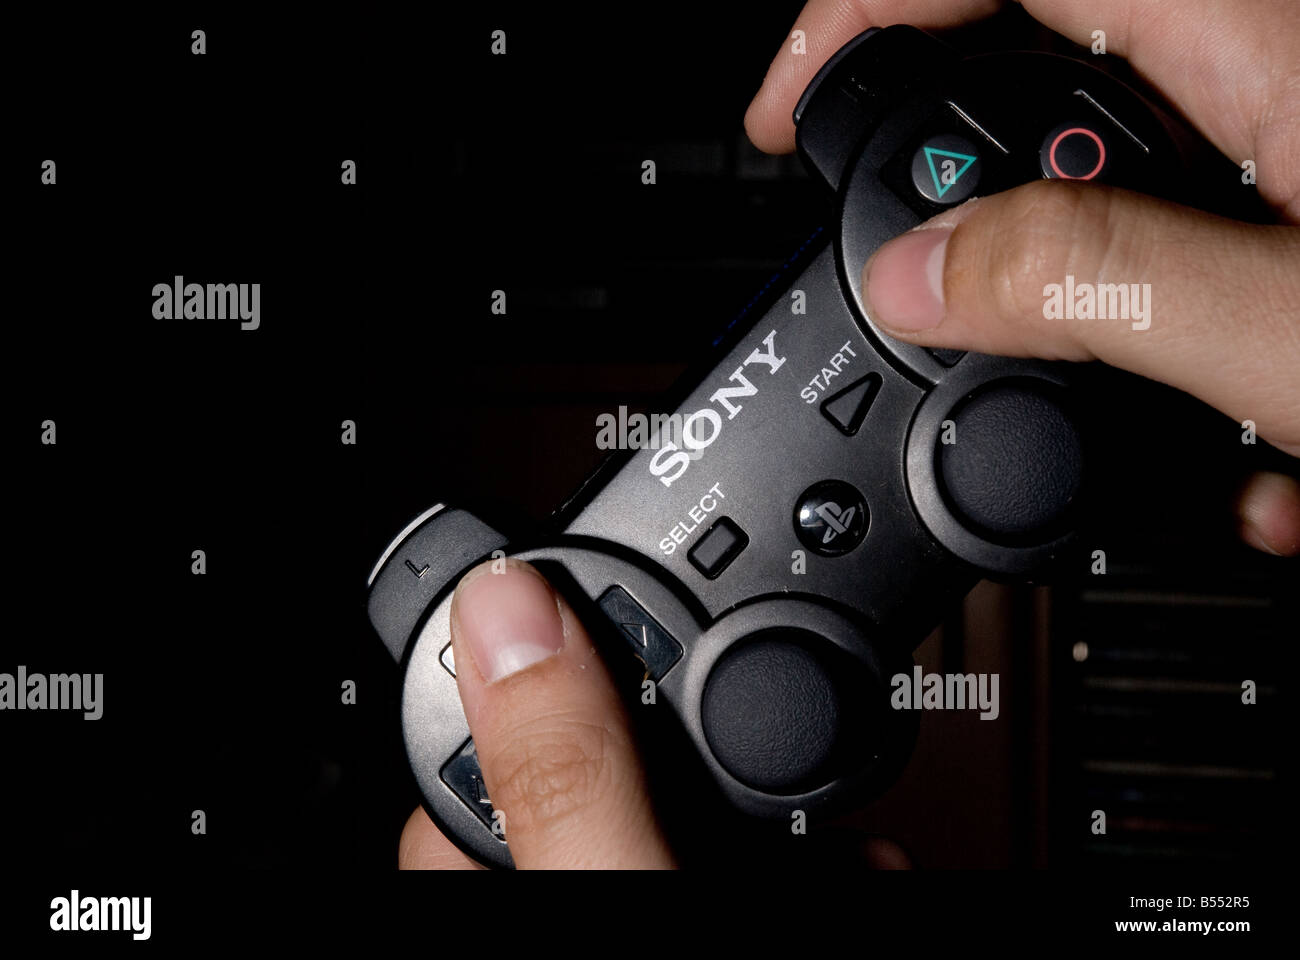 A Sony Playstation 3 controller being used to play a game. Stock Photo